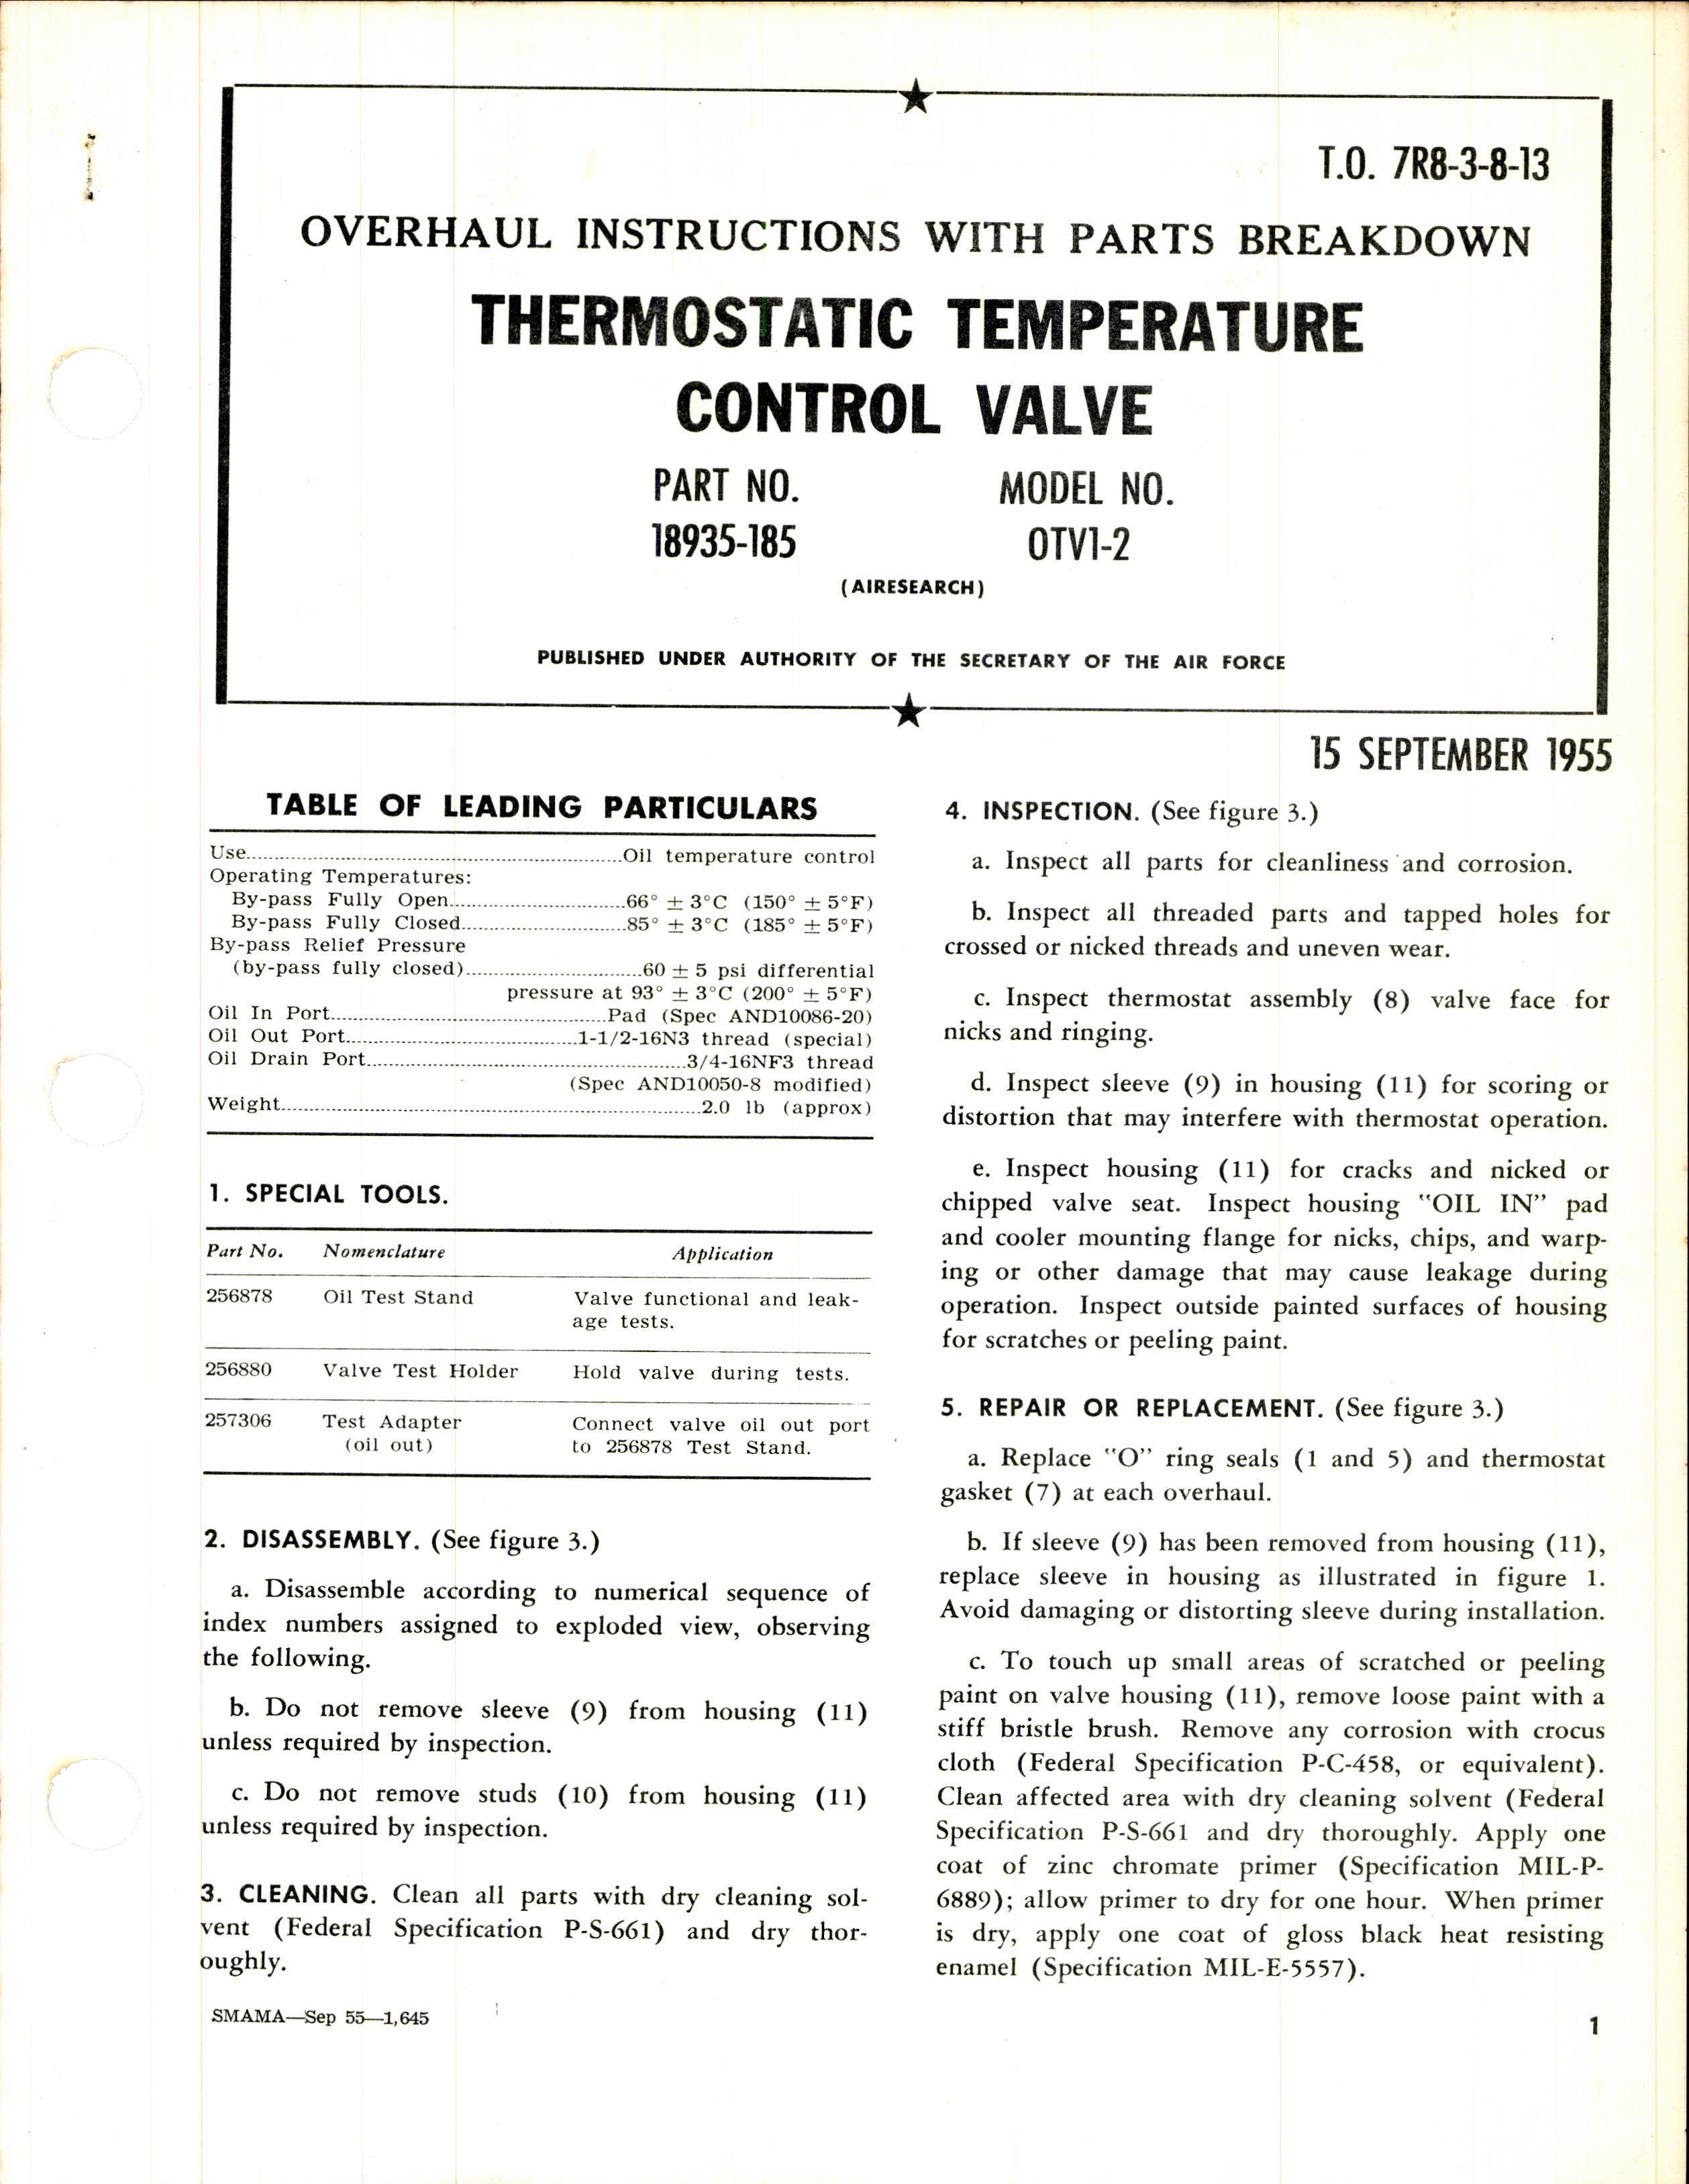 Sample page 1 from AirCorps Library document: Overhaul Instructions with Parts Breakdown for Thermostatic Temperature Control Valves